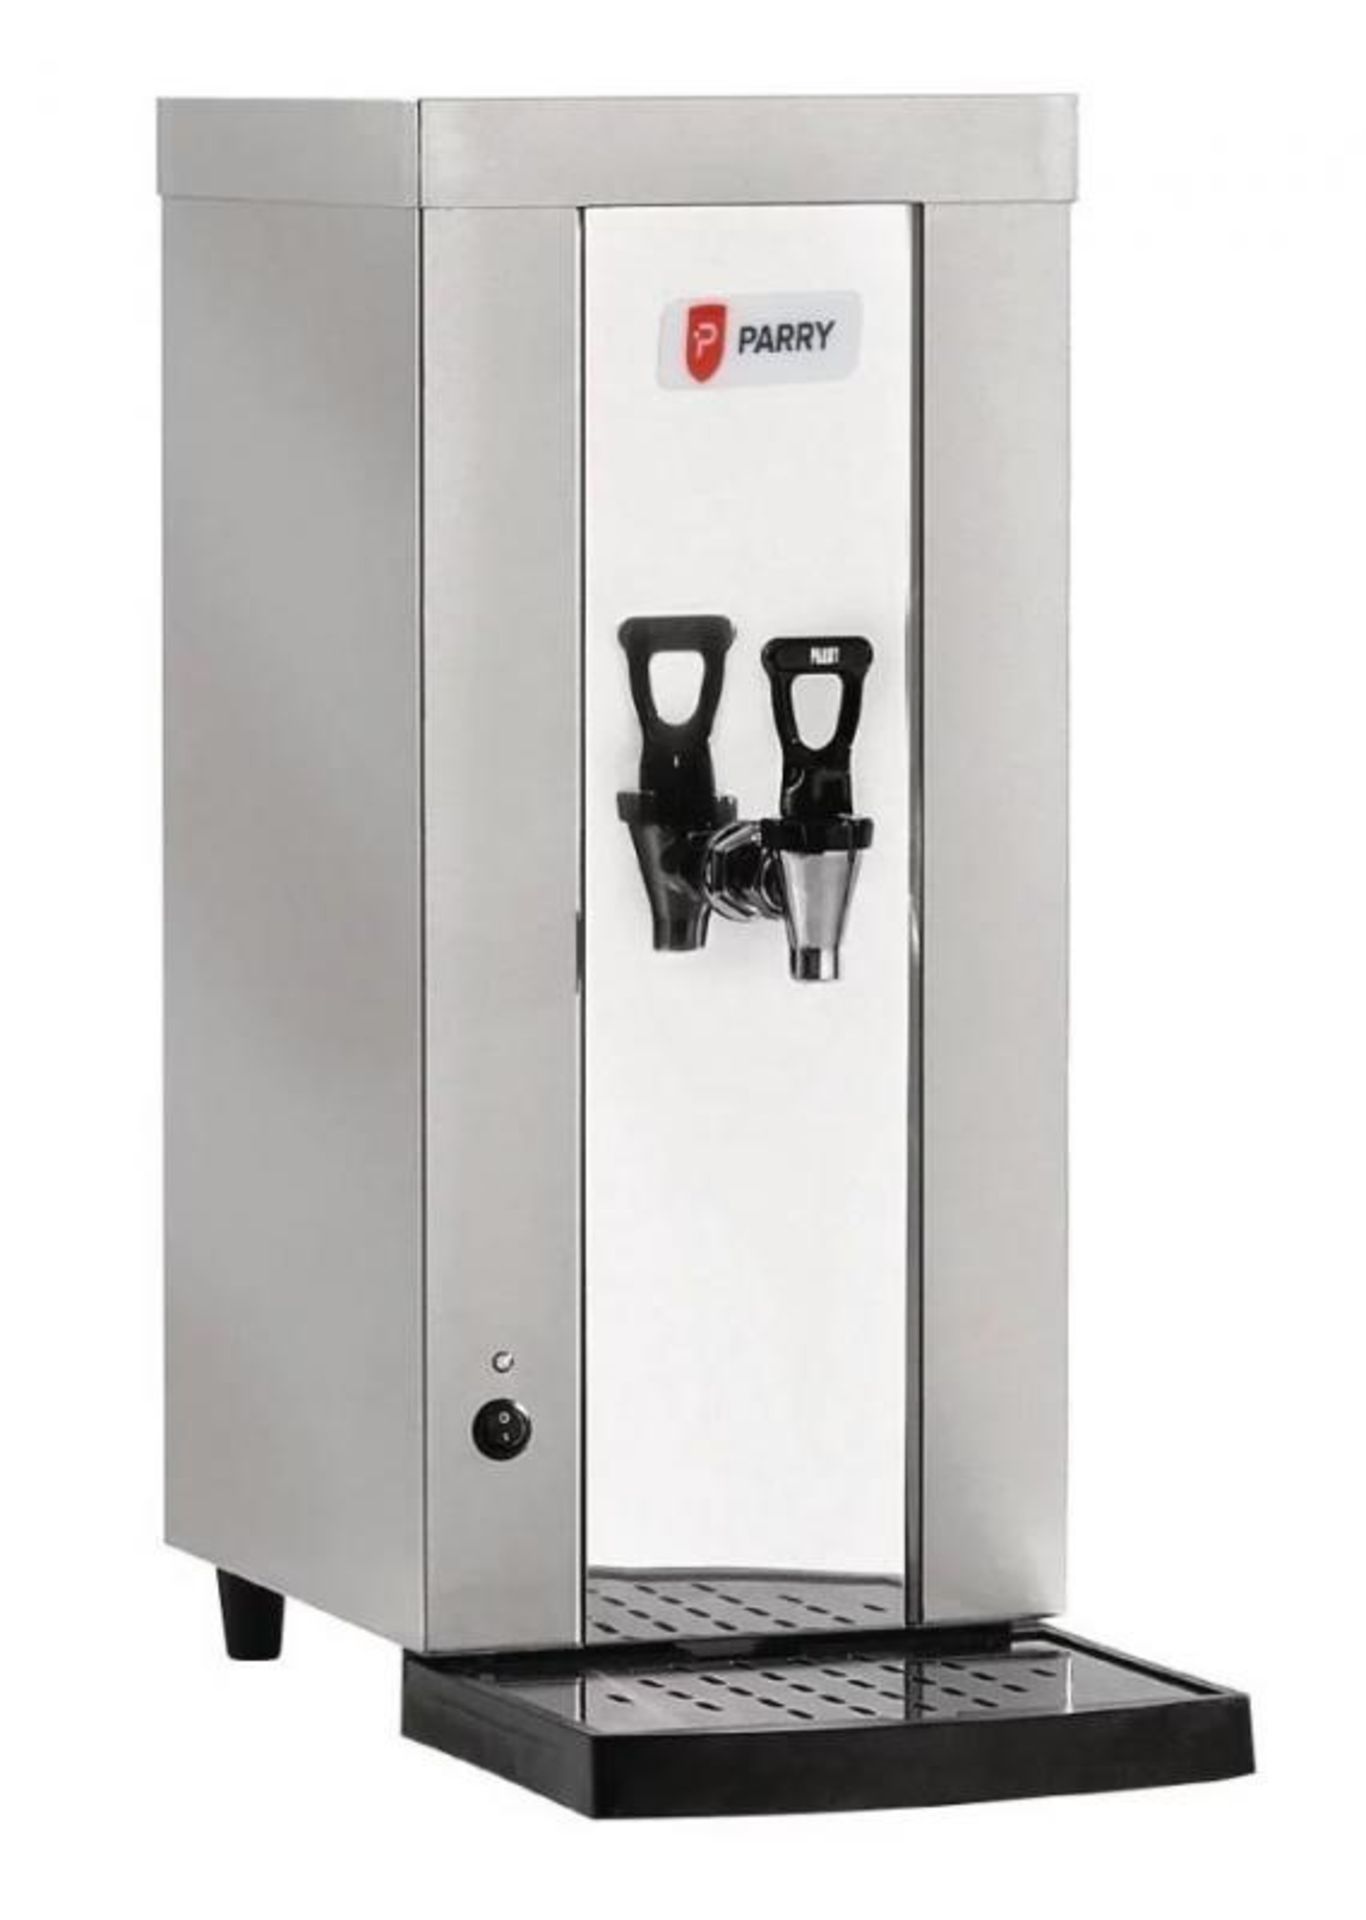 1 x Parry 12.5 Litre Counter Top Automatic Water Boiler - Stainless Steel Finish - 3000w Power - Mod